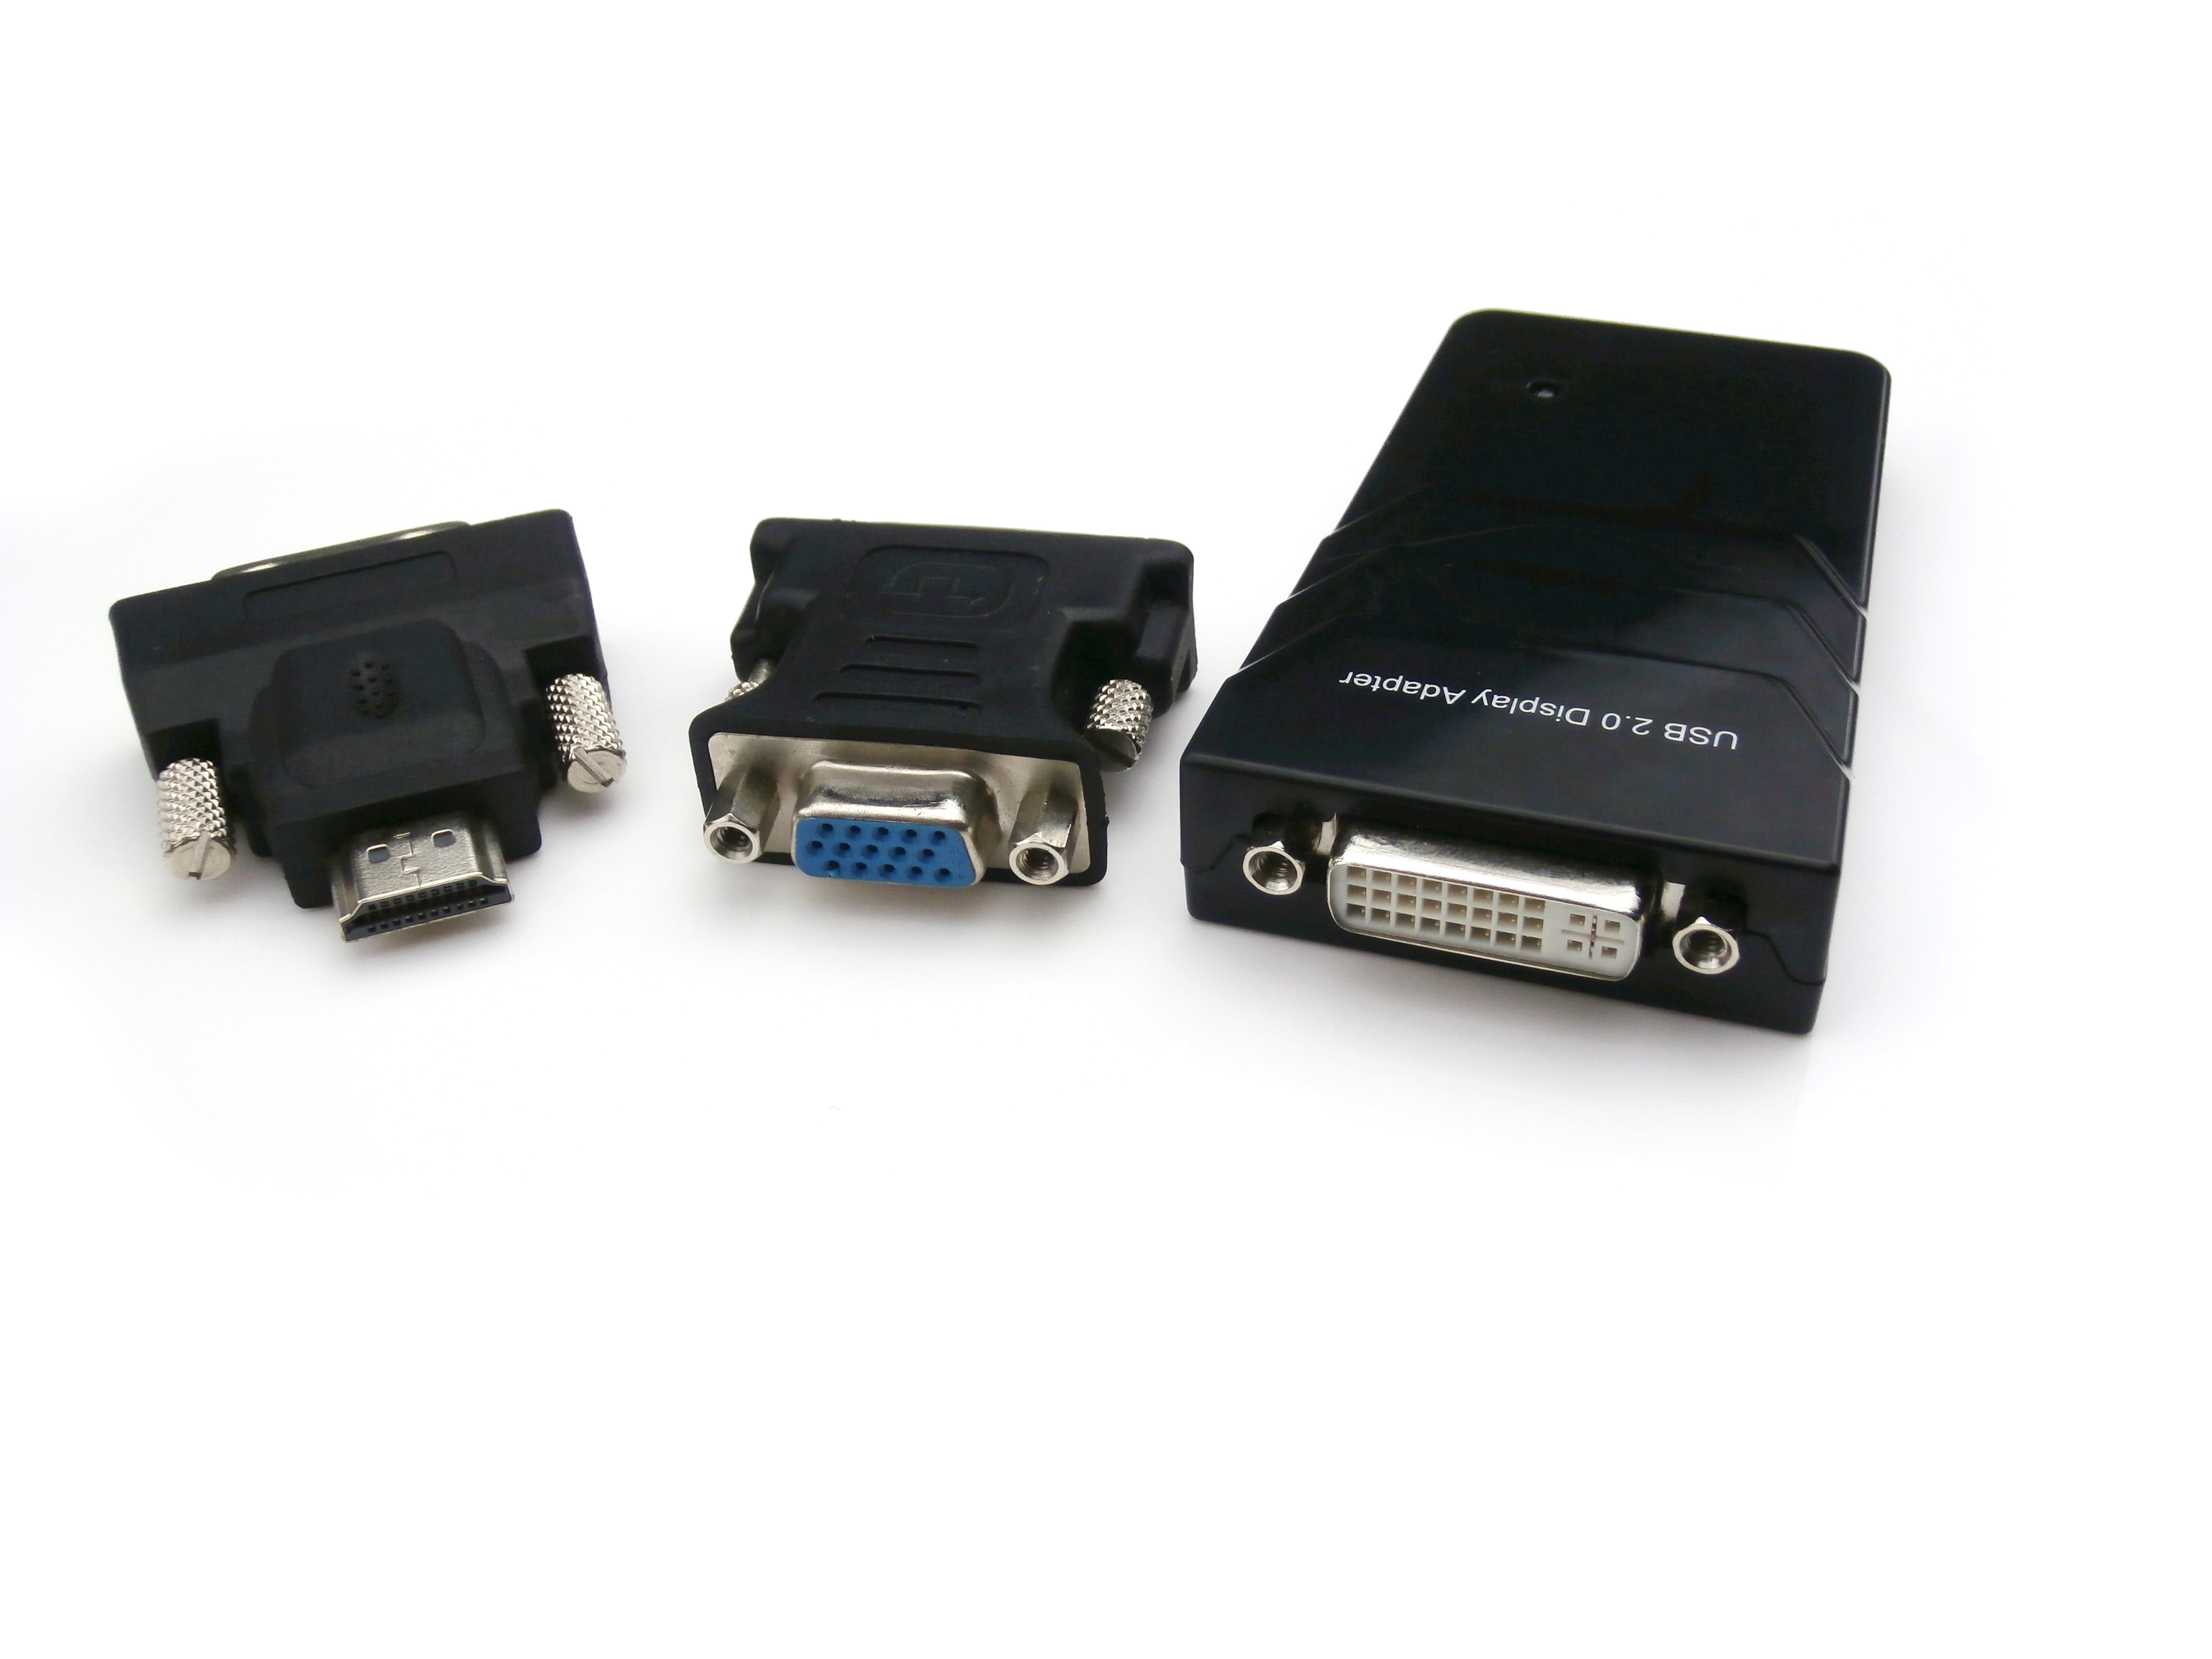 USB 2.0 to DVI Adapter